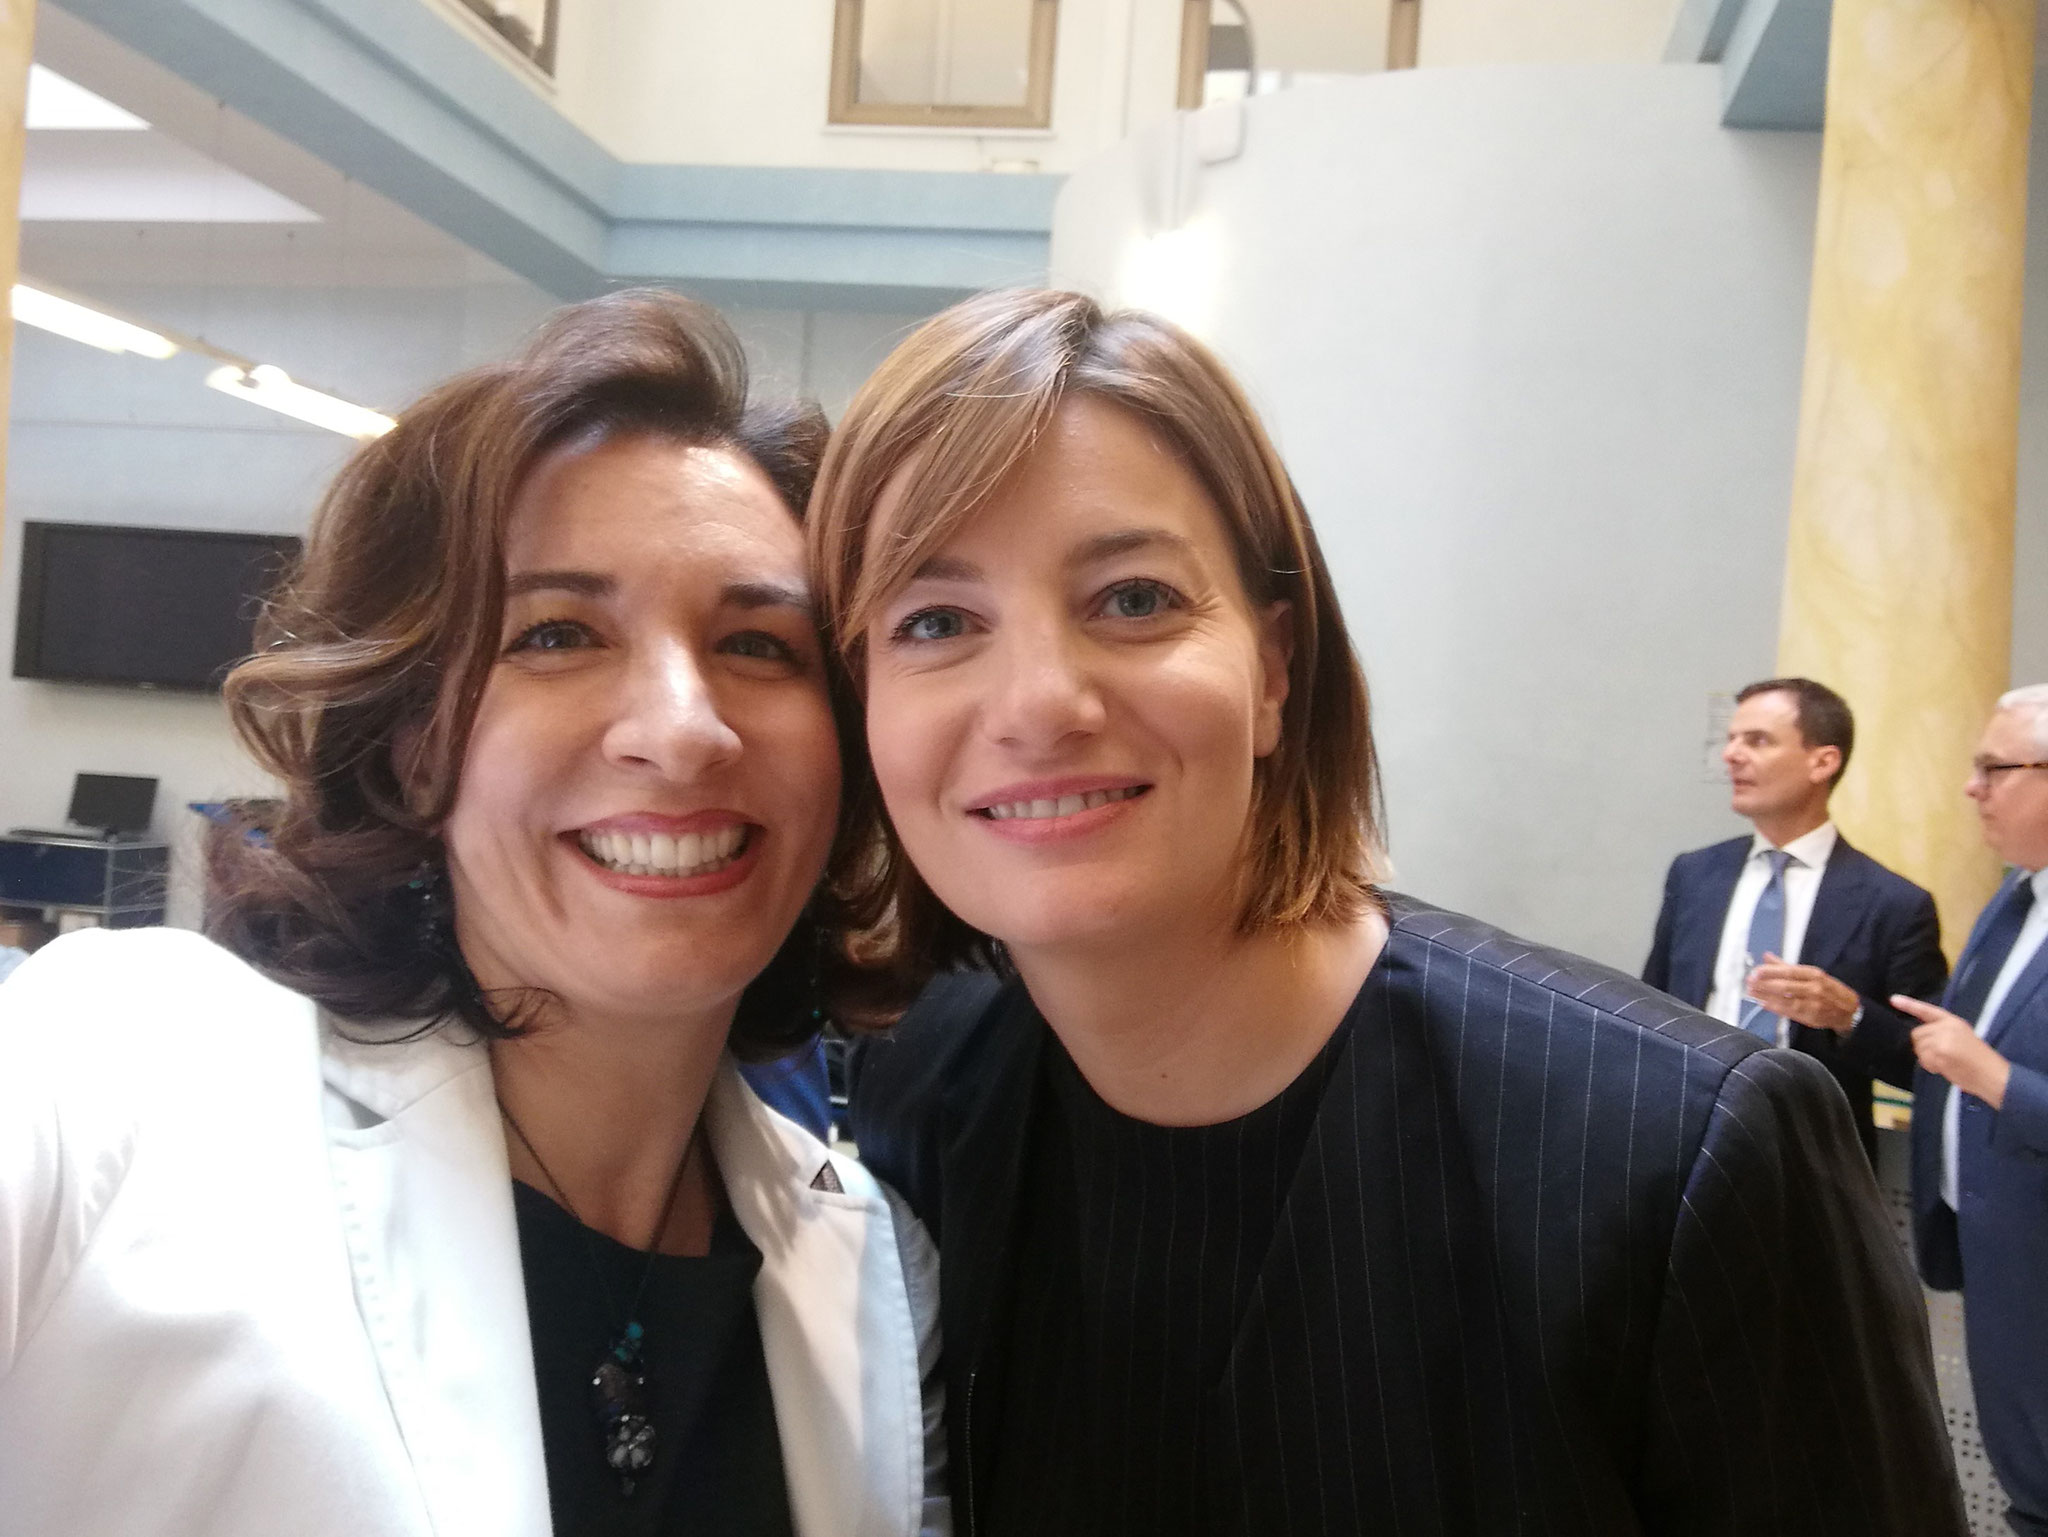 EN/IT chuchotage at the International Workshop "Smart Work Better Life" with the Euro Parliamentarian Lara Comi in Rome, 8 June 2017